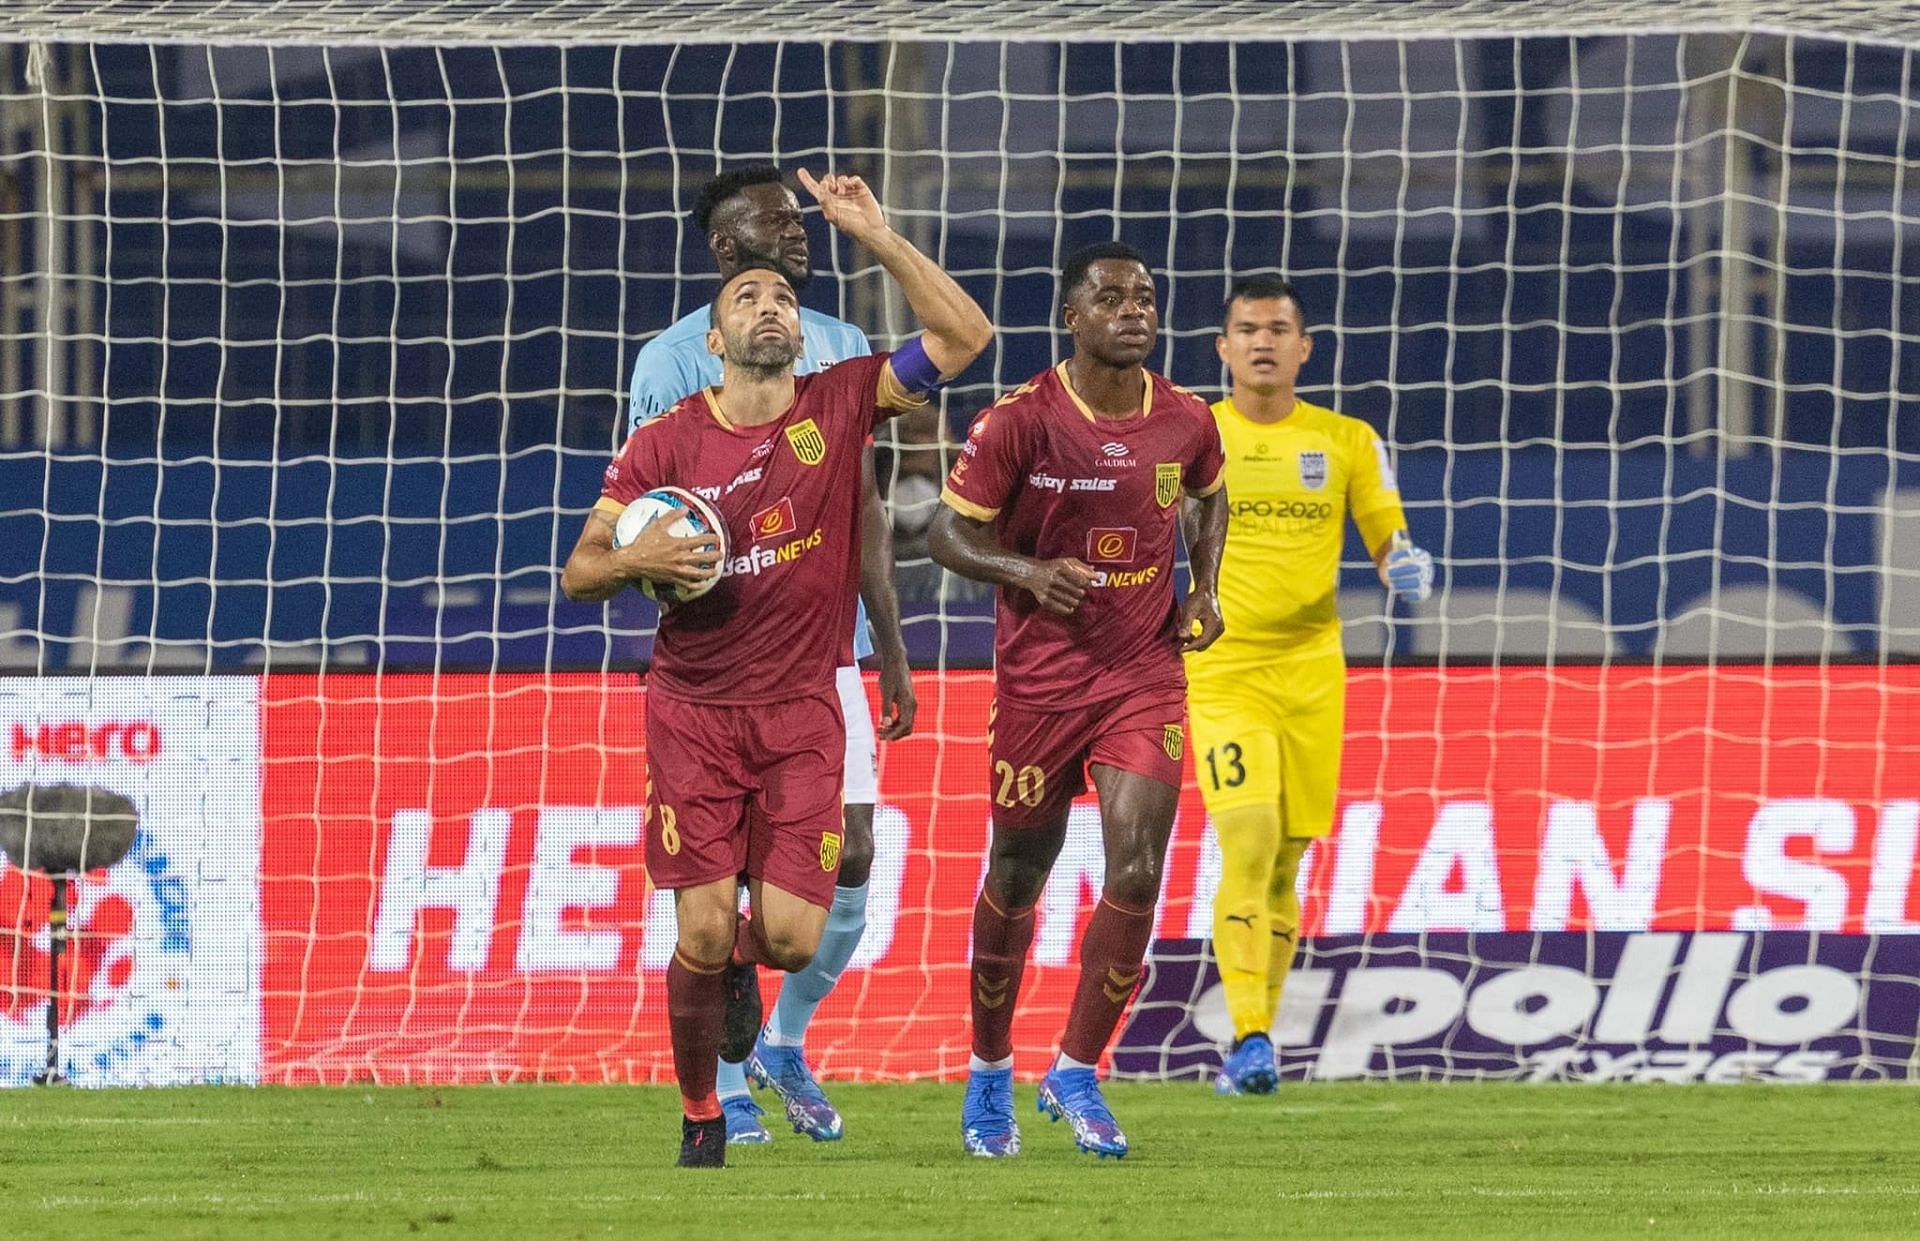 Joao Victor and Ogbeche scored to give Hyderabad a comfortable victoy (Image courtesy: ISL Social Media)